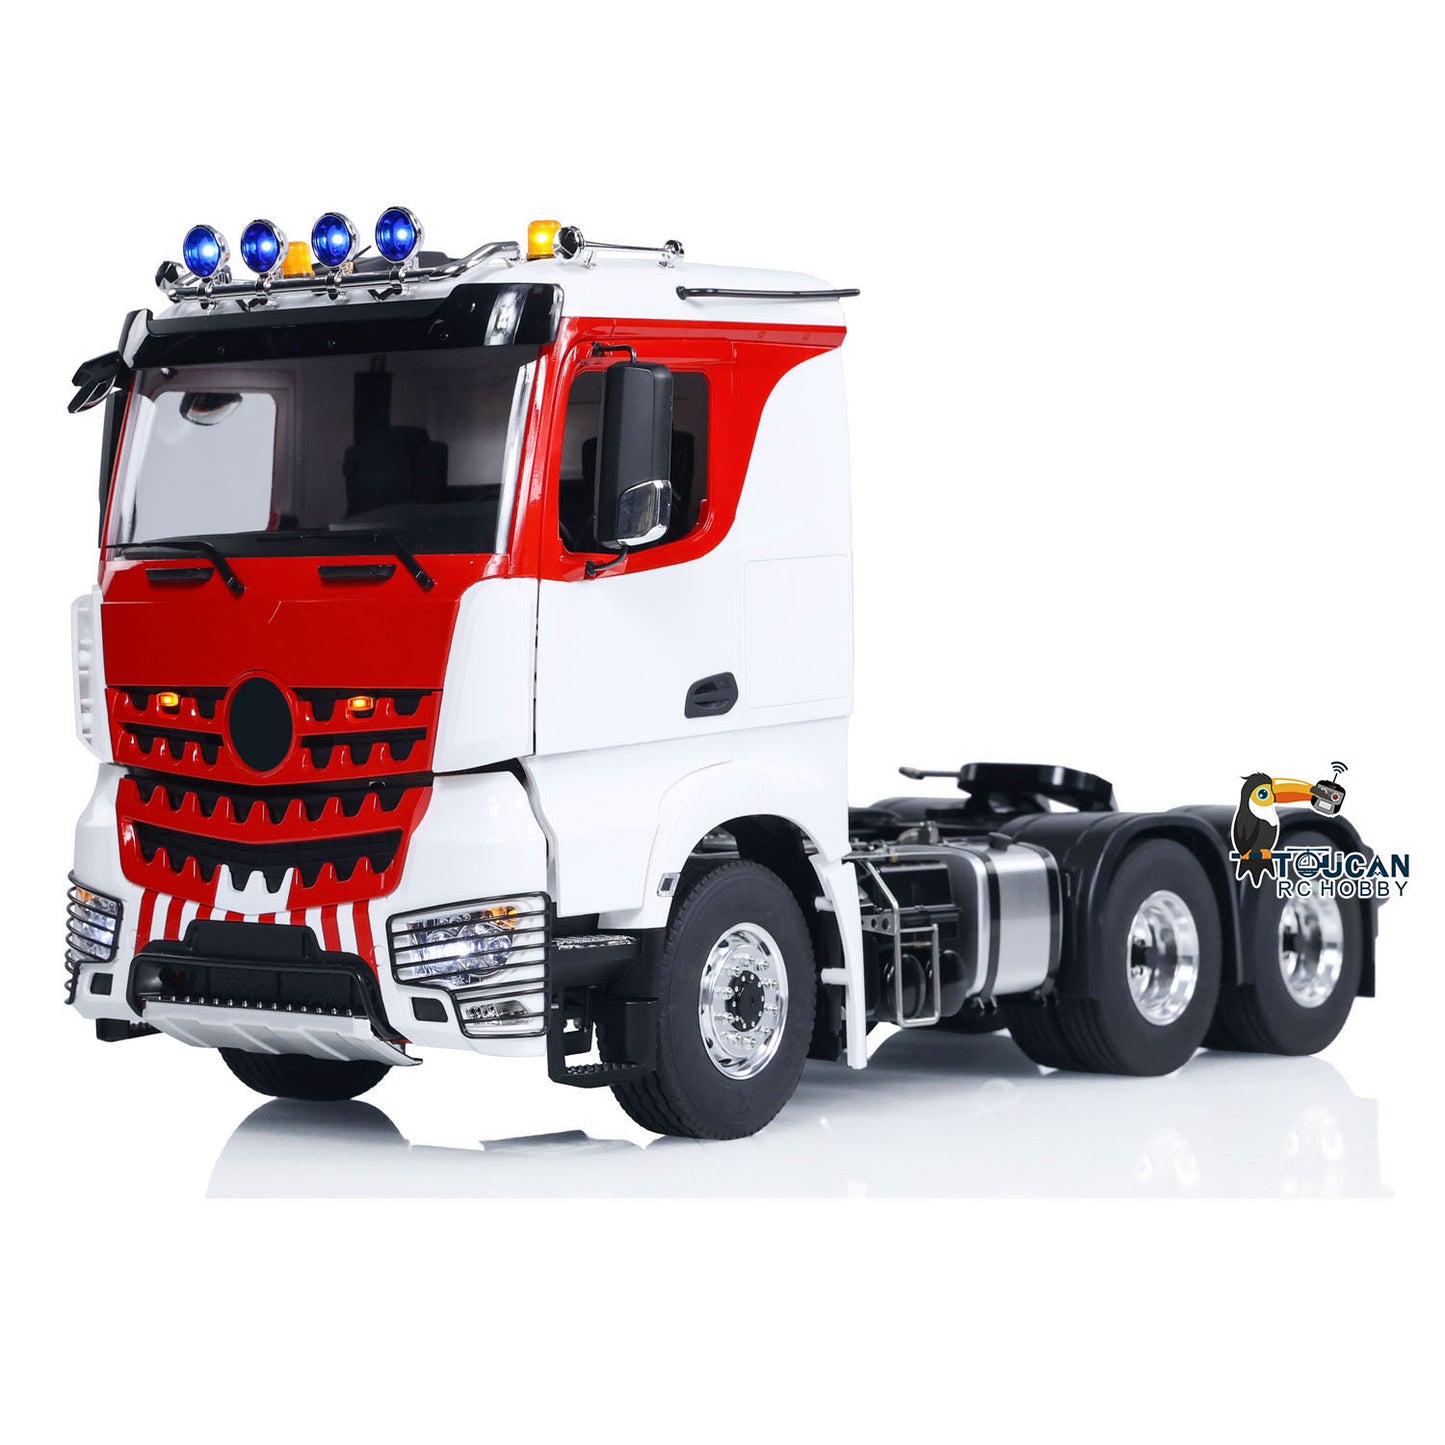 LESU 6x6 RC Tractor Truck 1/14 RC Car Painted Assembled Smoke